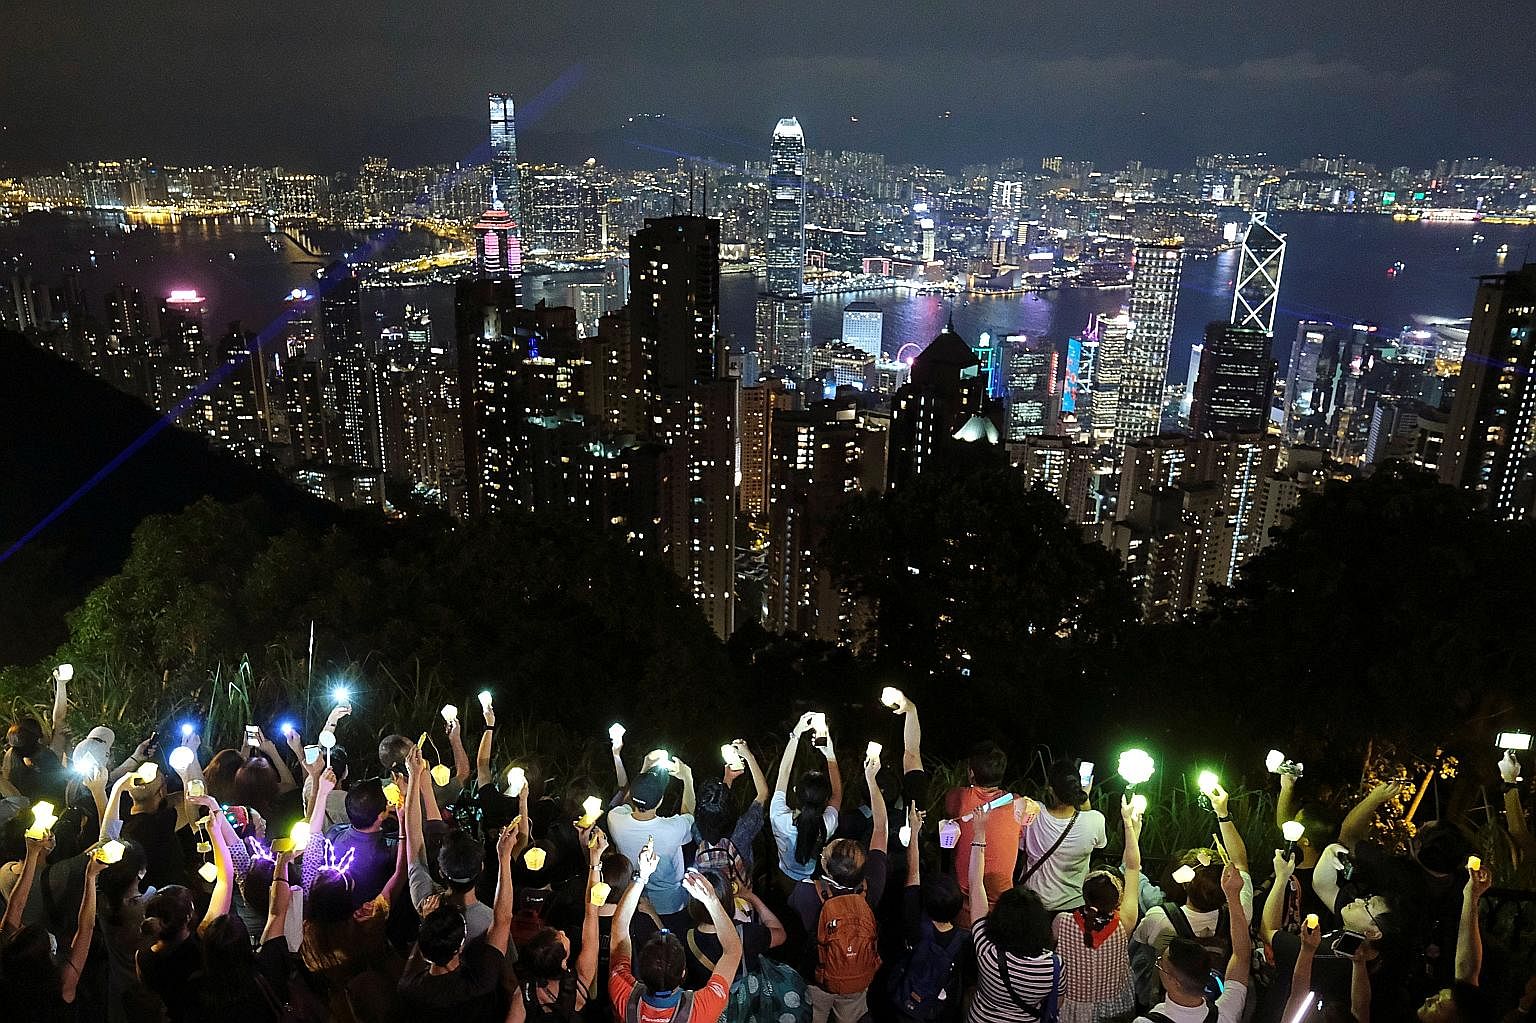 Hong Kong pro-democracy protesters took to the hills, including Victoria Peak, to form flashlight-carrying human chains last night, using the Mid-Autumn Festival as an occasion for their latest rally in more than three months of demonstrations that h